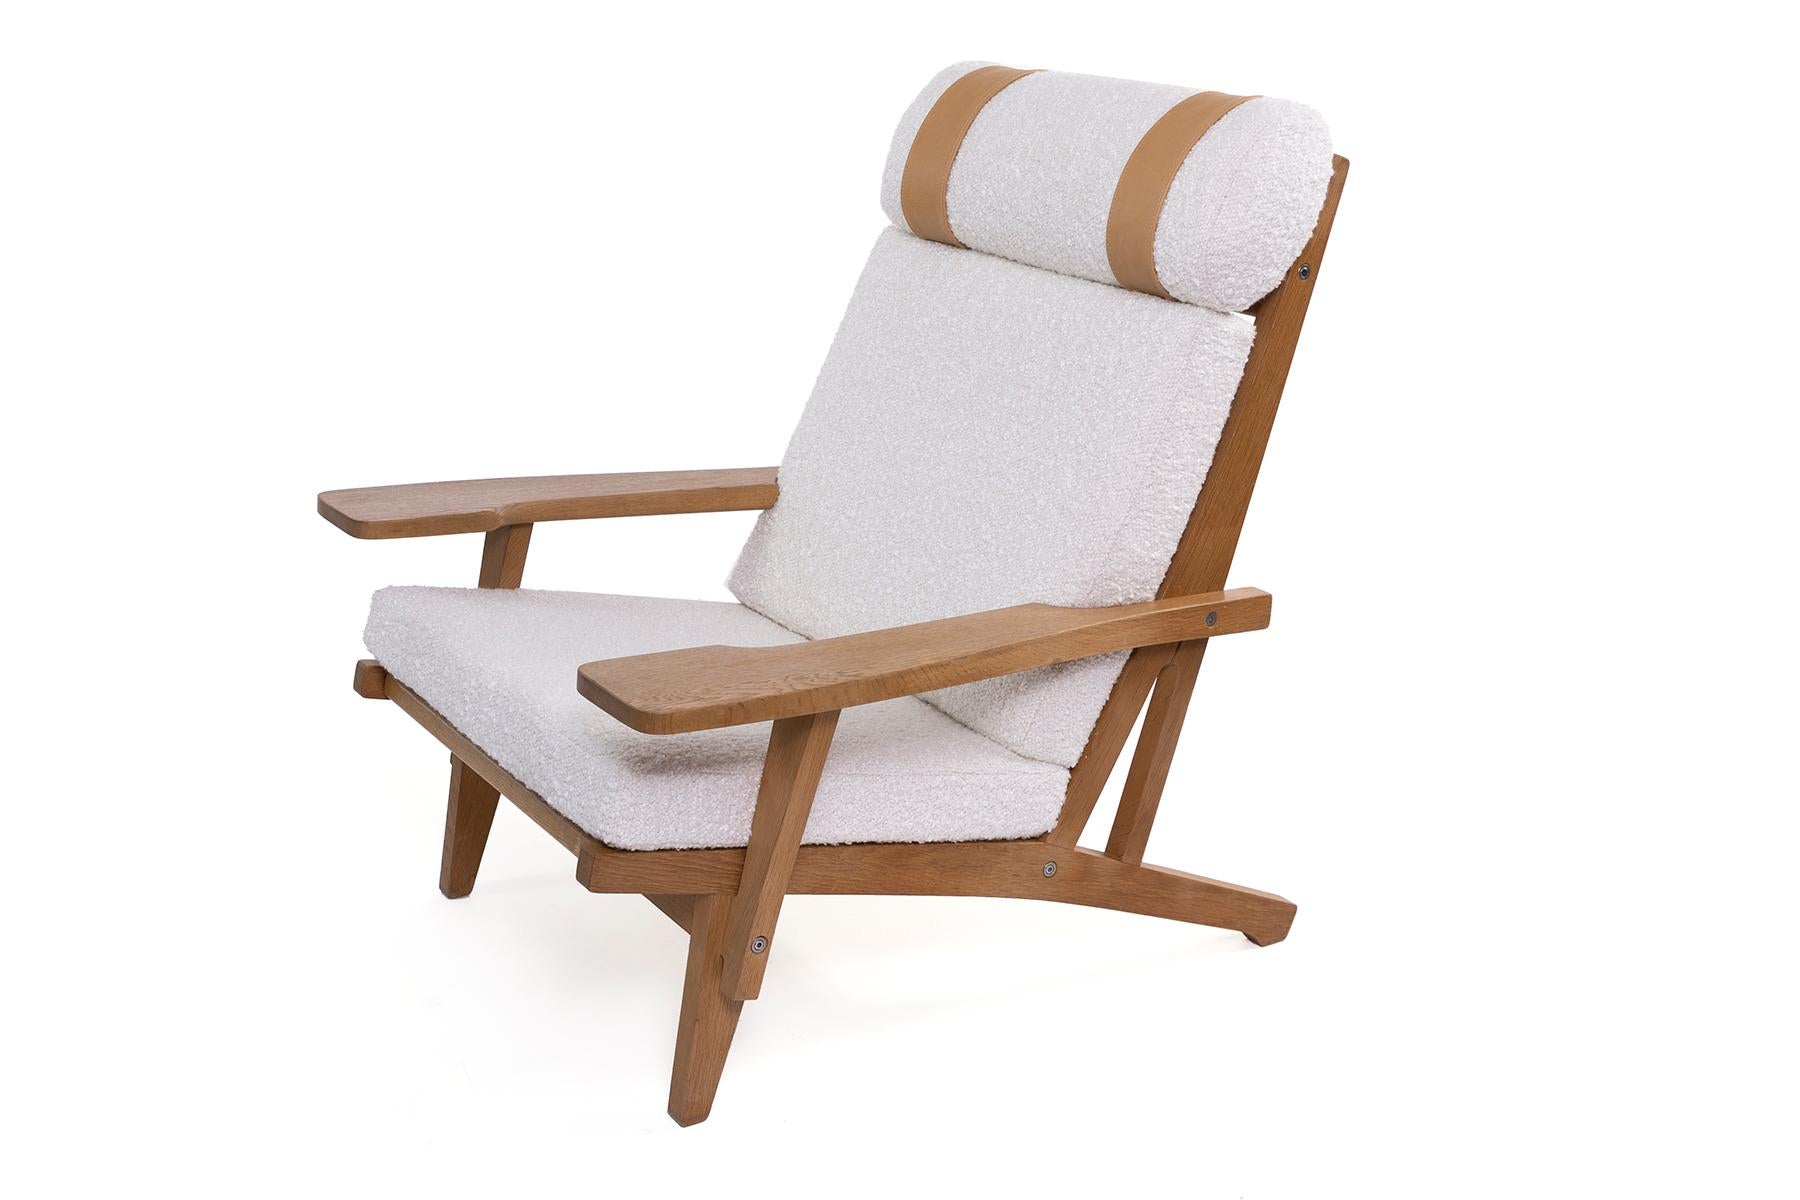 Two Hans J. Wegner for GETAMA wide arm lounge chairs & ottomans in white Turkish bouclé with soft leather accents on the head cushion. Official stamp on the bottom of each chair. Accompanying ottoman measures: 25.5